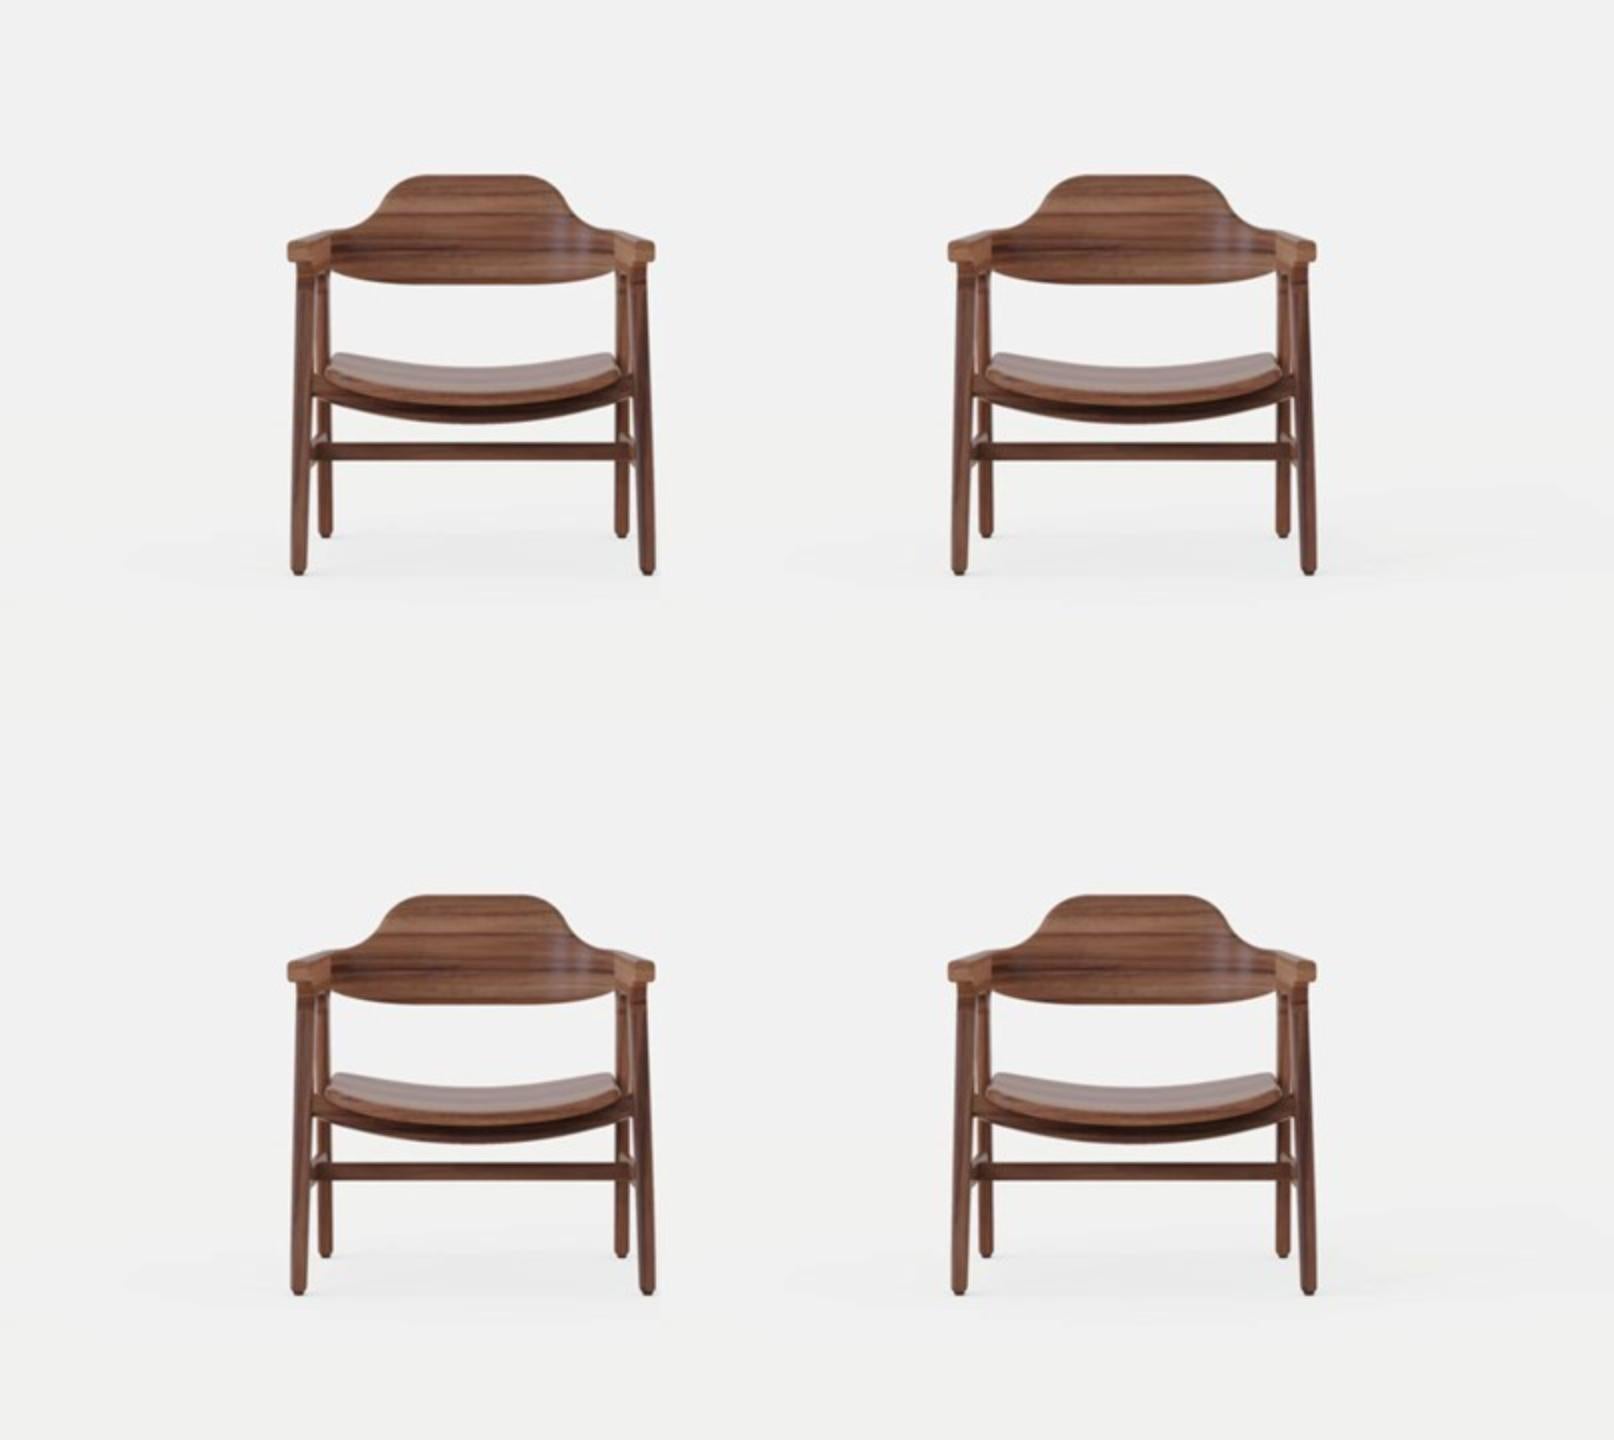 Set Of 4 Sensato Armchair by Sebastián Angeles
Material: Walnut
Dimensions: W 45 x D 40 x 100 cm
Also Available: Other colors available,

The love of processes, the properties of materials, details and concepts make Dorica Taller a study not